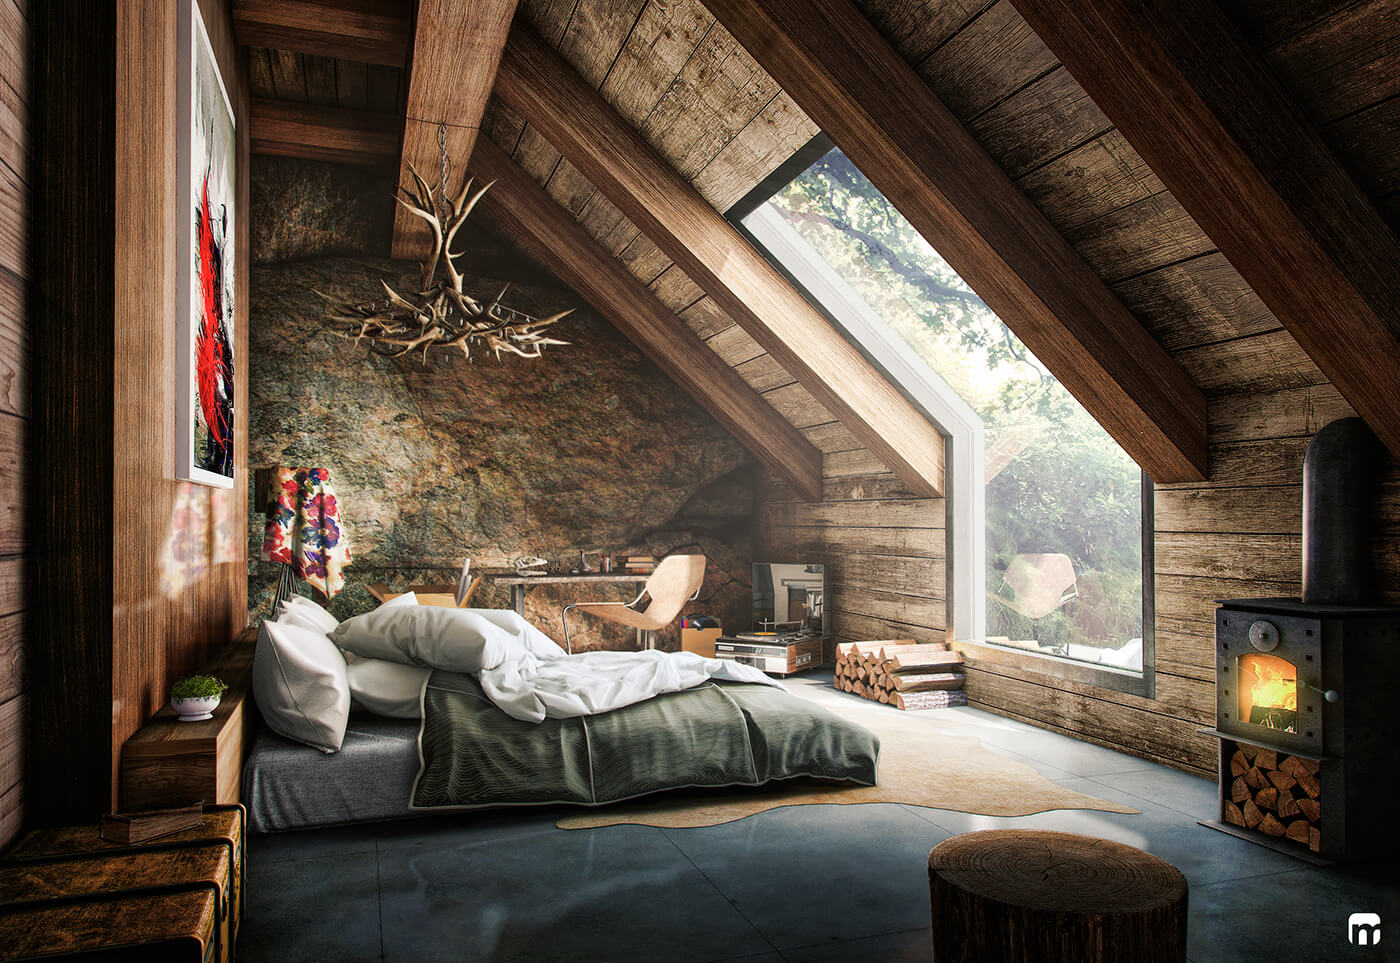 cabin fever nordroom12 Cabin Fever: 10 Cozy Cabins for Escaping The World